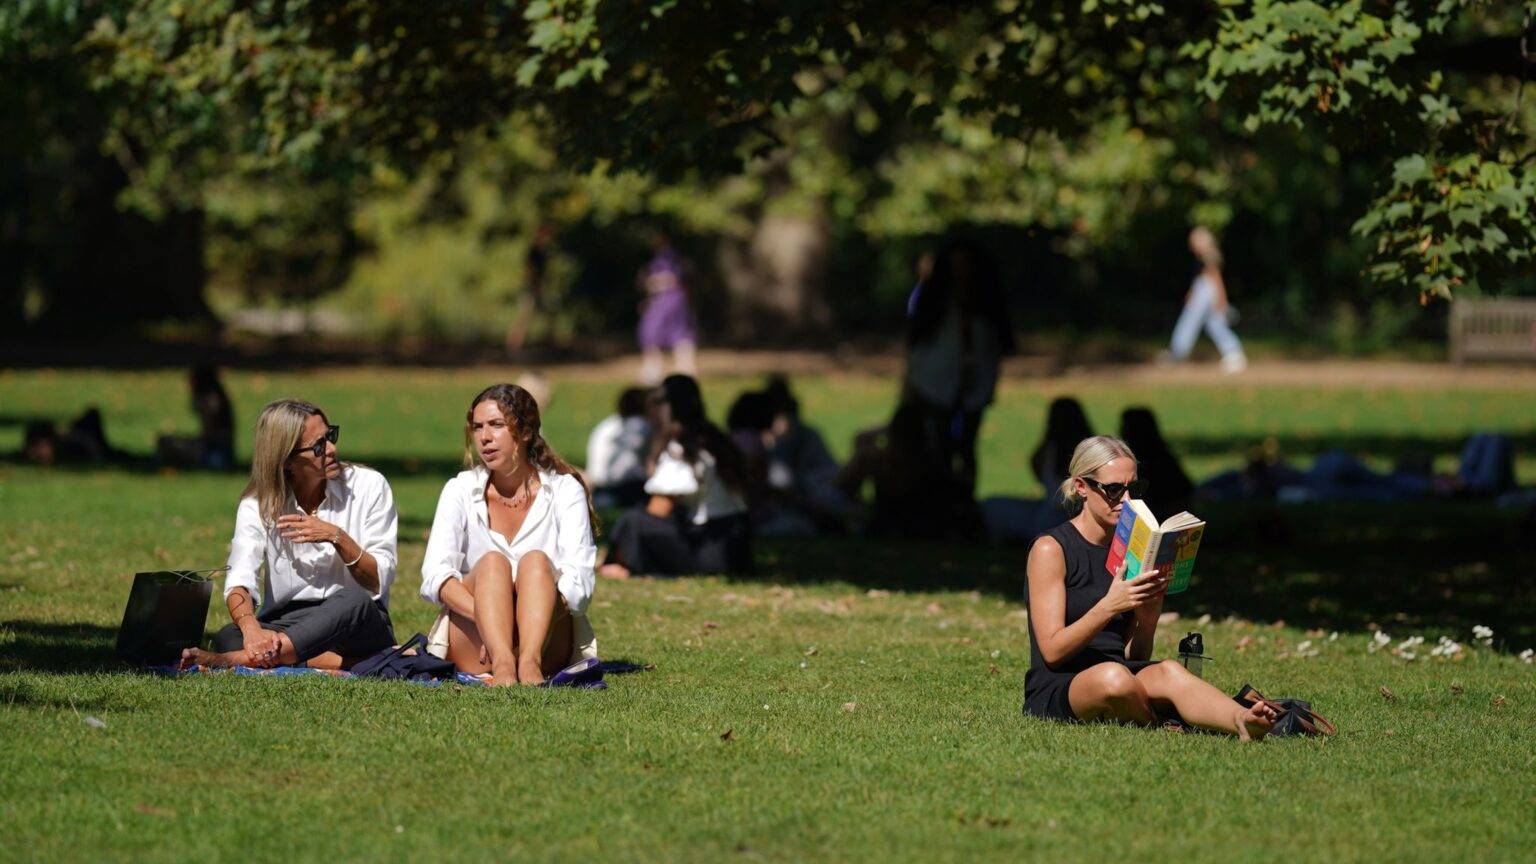 UK weather: Today could be hottest day of the year so far – as late heatwave arrives